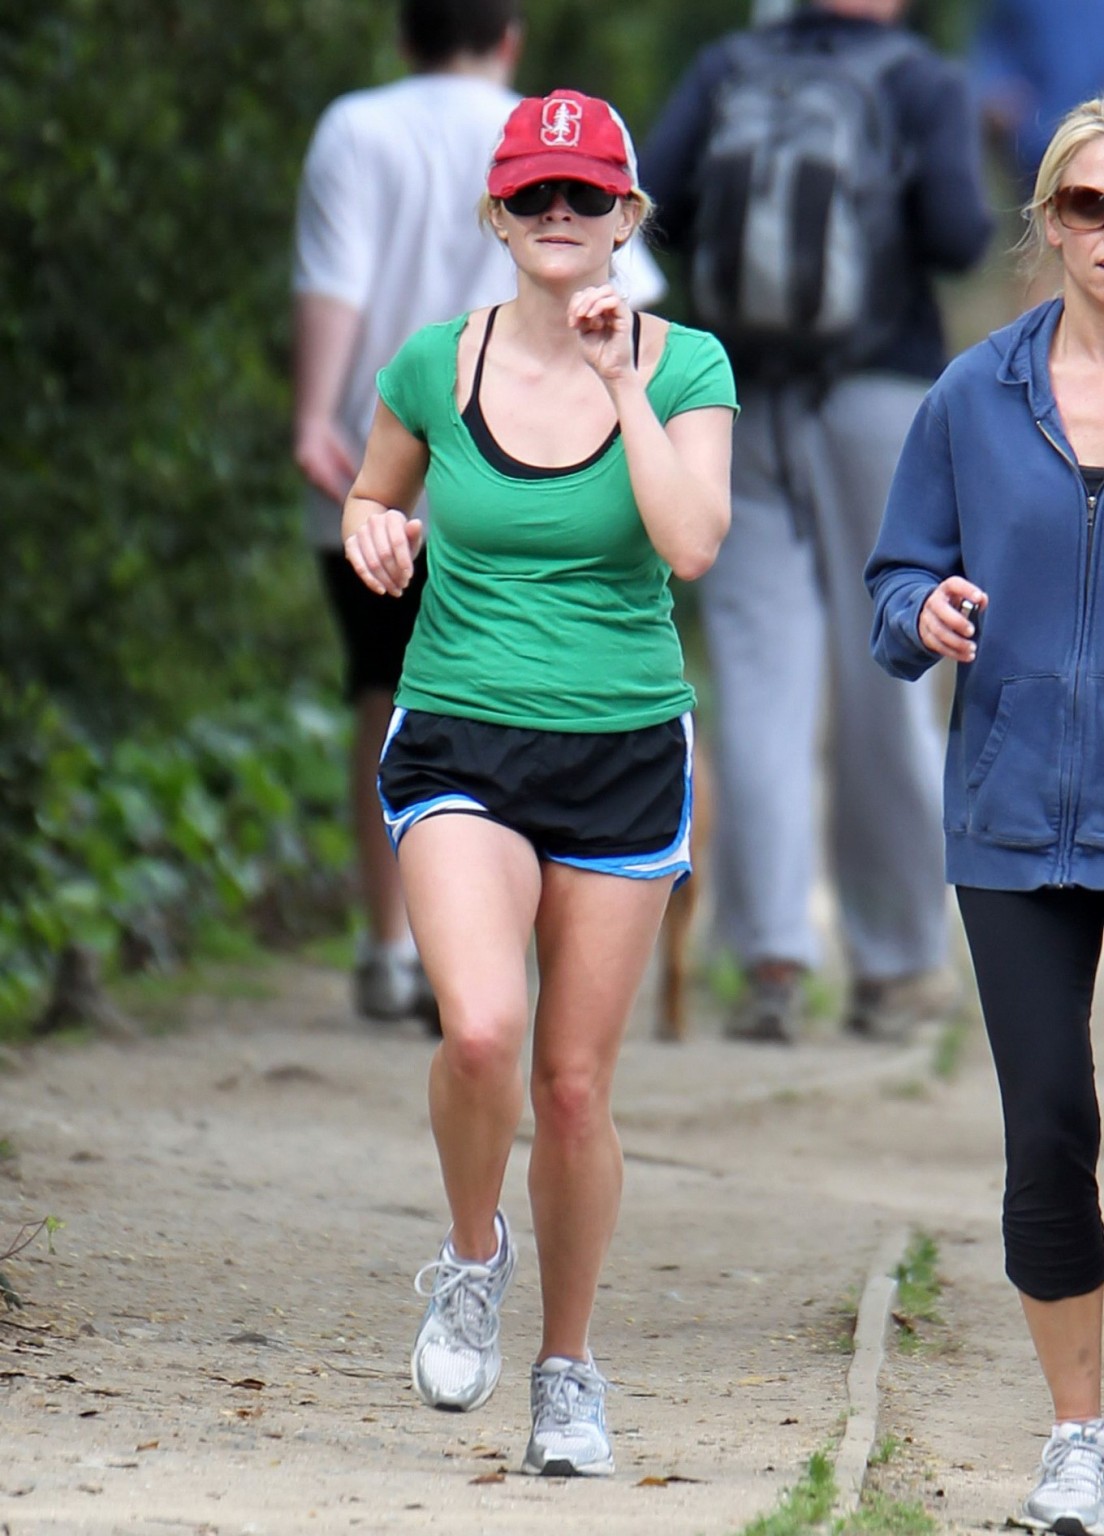 Reese Witherspoon langbeinig in Shorts beim Joggen in Brentwood
 #75312862